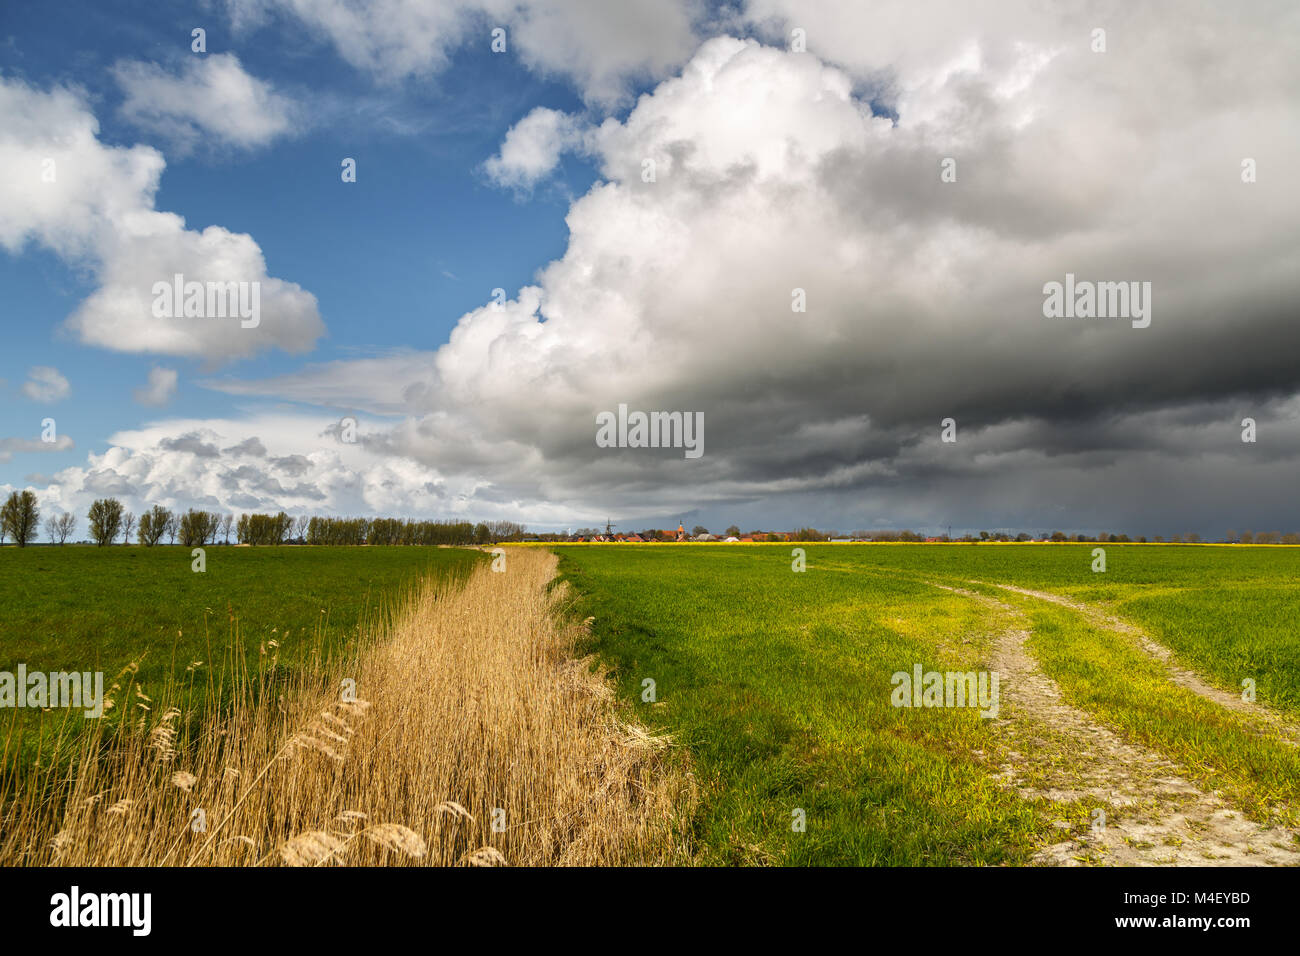 Searing storm above the fields Stock Photo